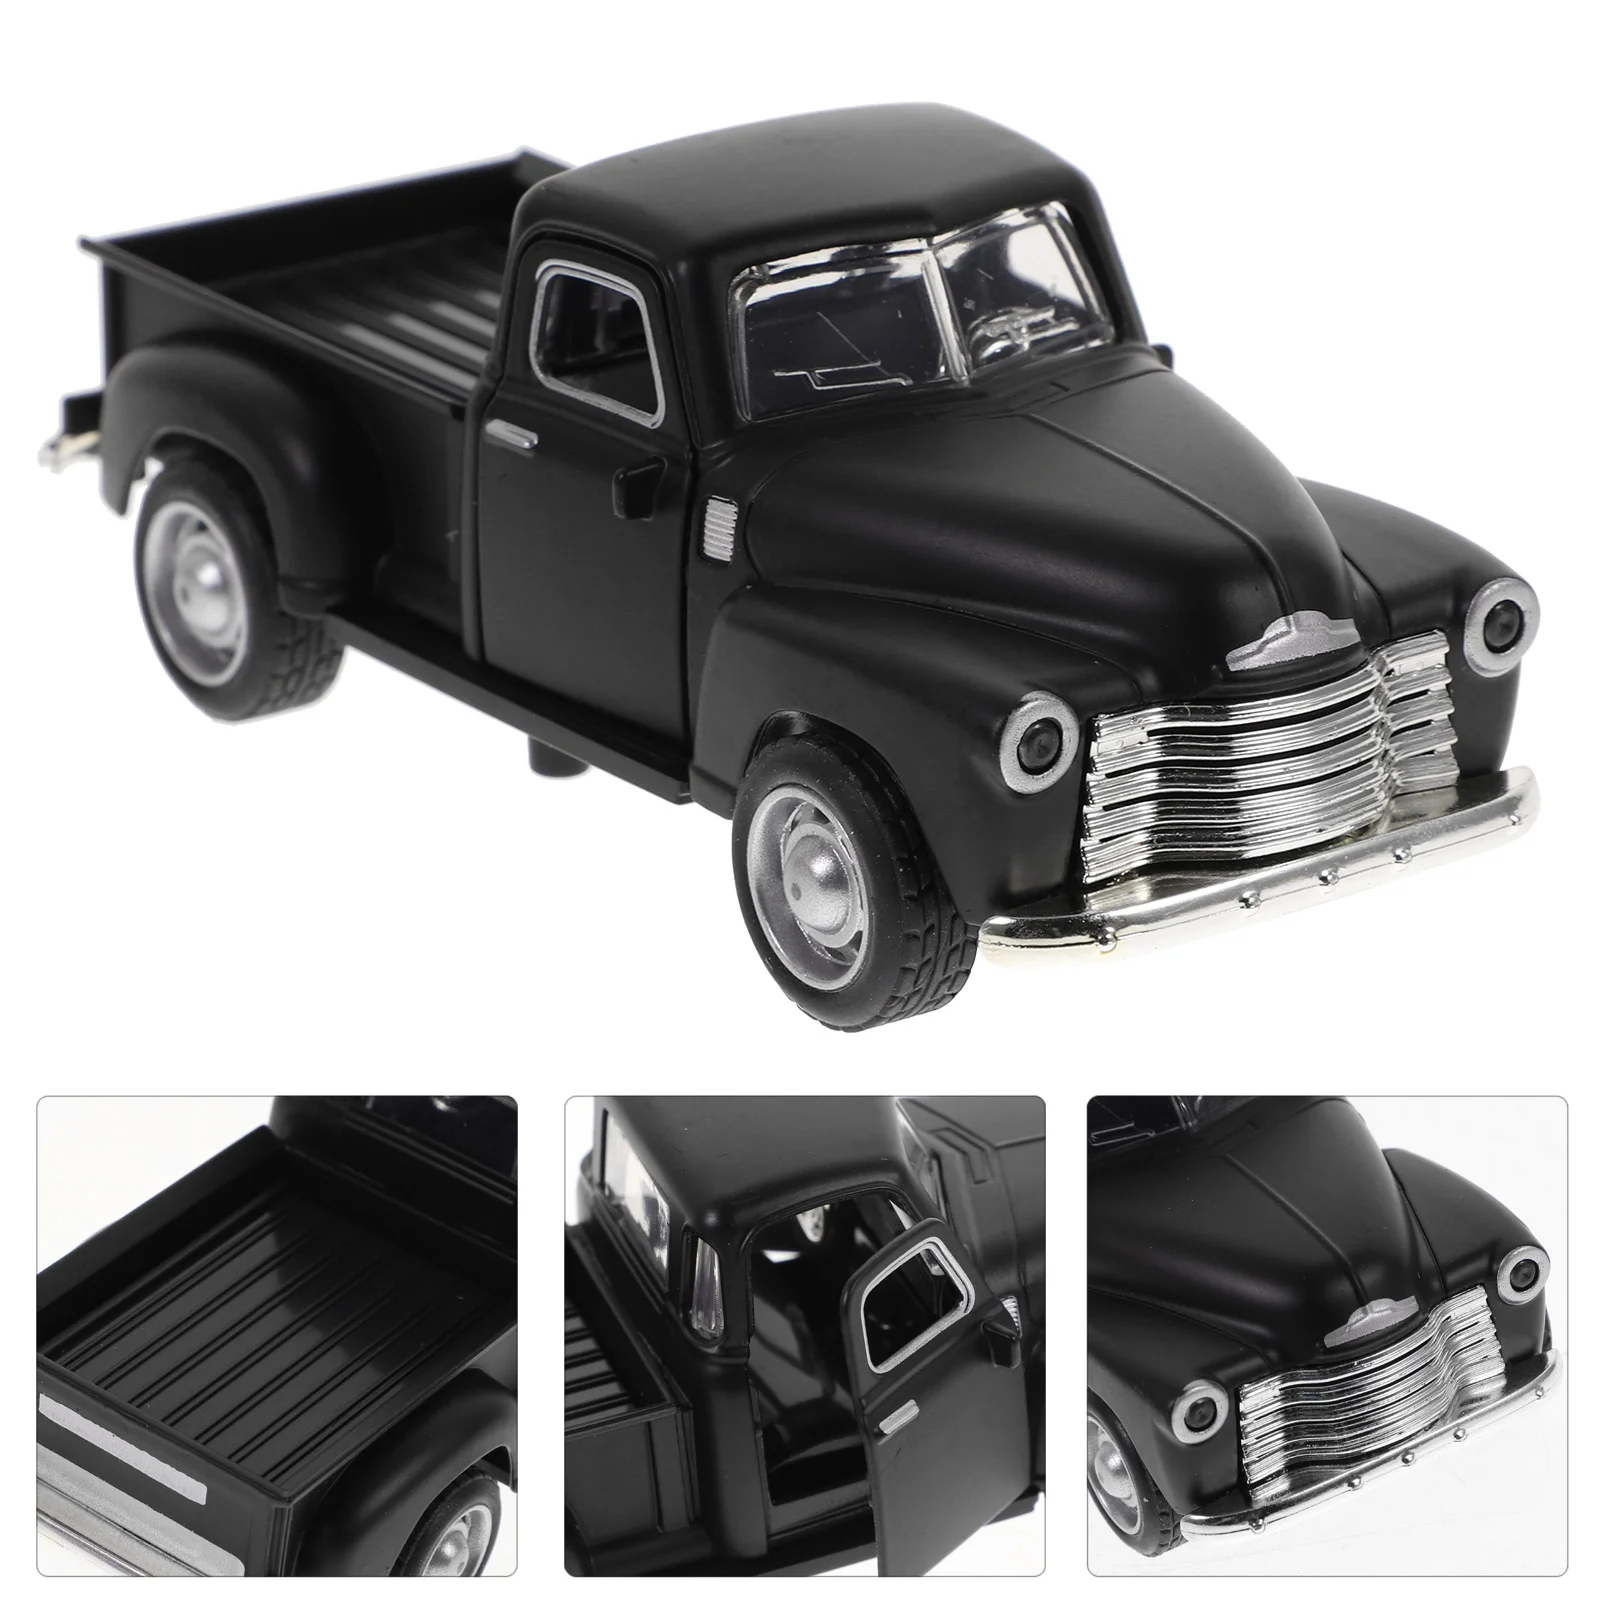 

Truck Car Model Pickup Metal Decor Christmas Toy Vintage Cars Red Alloy Old Retro Decoration Figurine Diecast Die Cast Vehicle